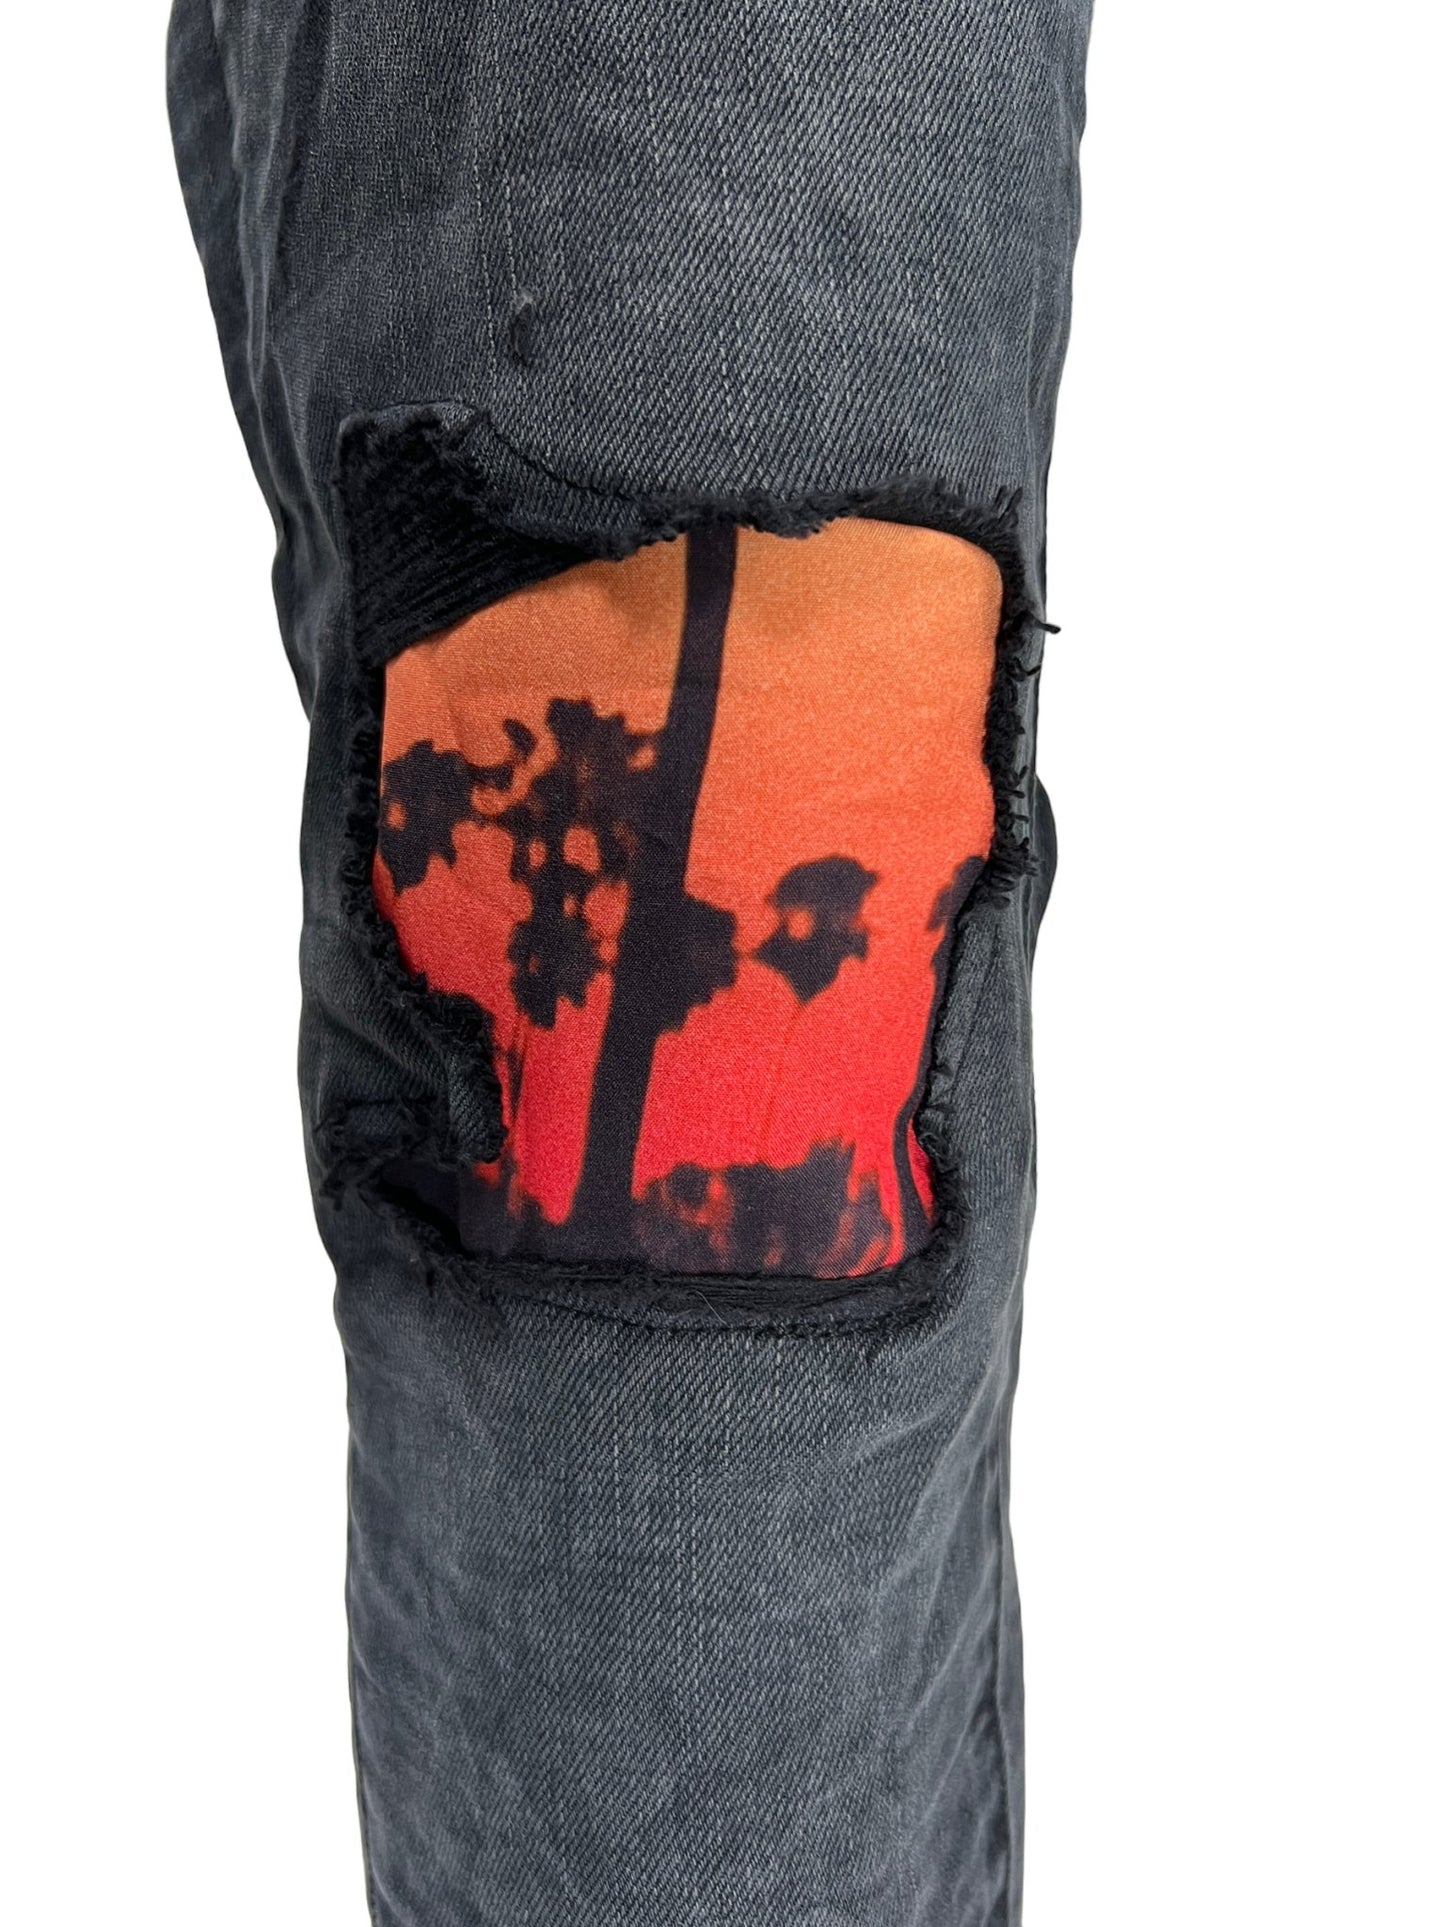 A pair of PURPLE BRAND ripped jeans with an image of a palm tree.